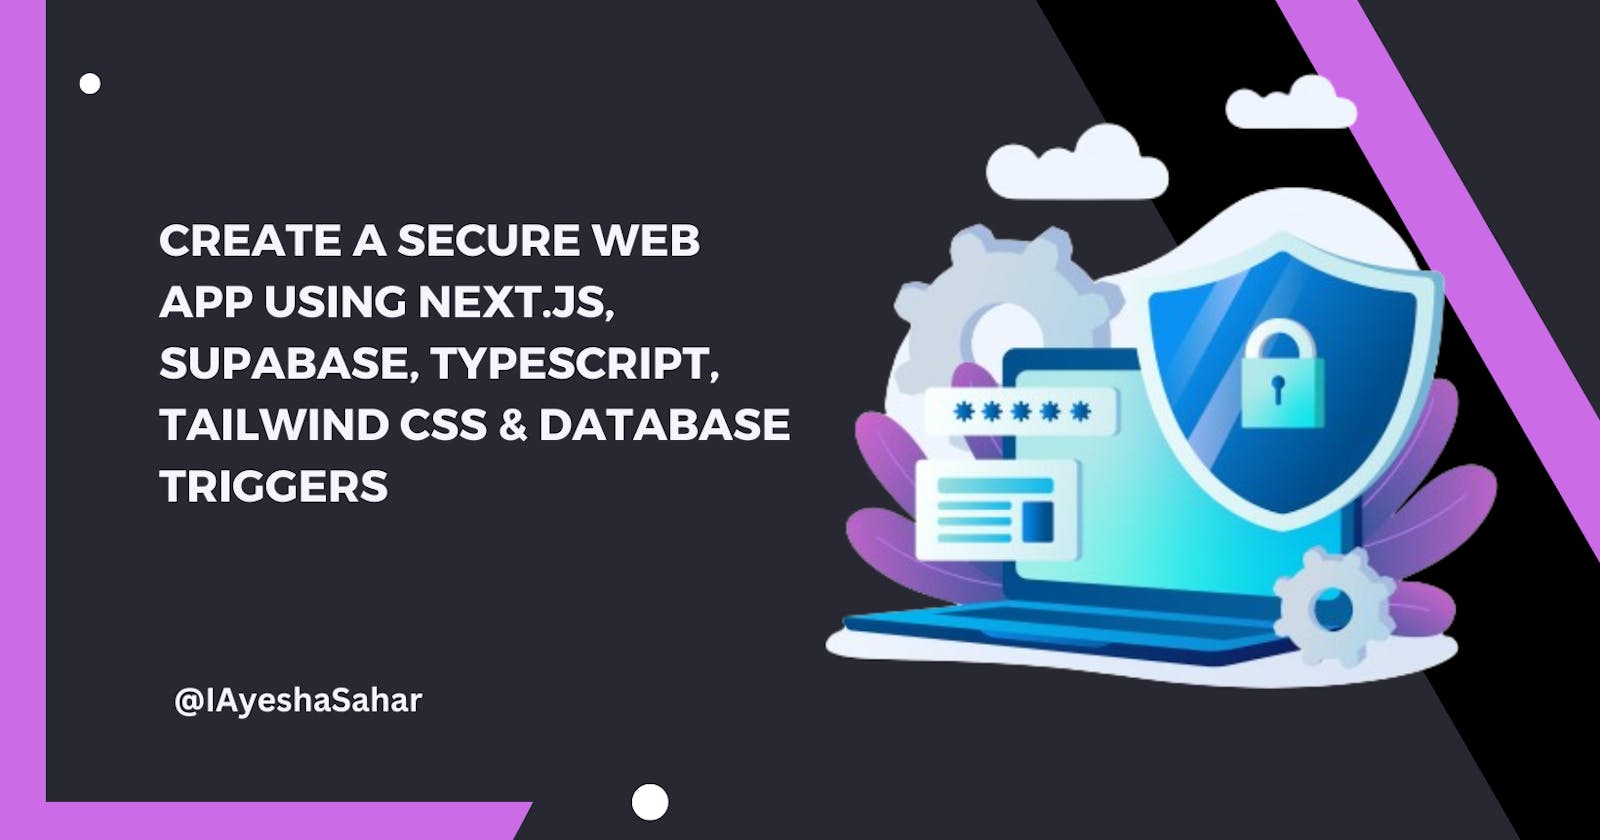 Complete Guide to a Secure Web App using Next.js, Supabase, TypeScript, Tailwind CSS & Database Triggers